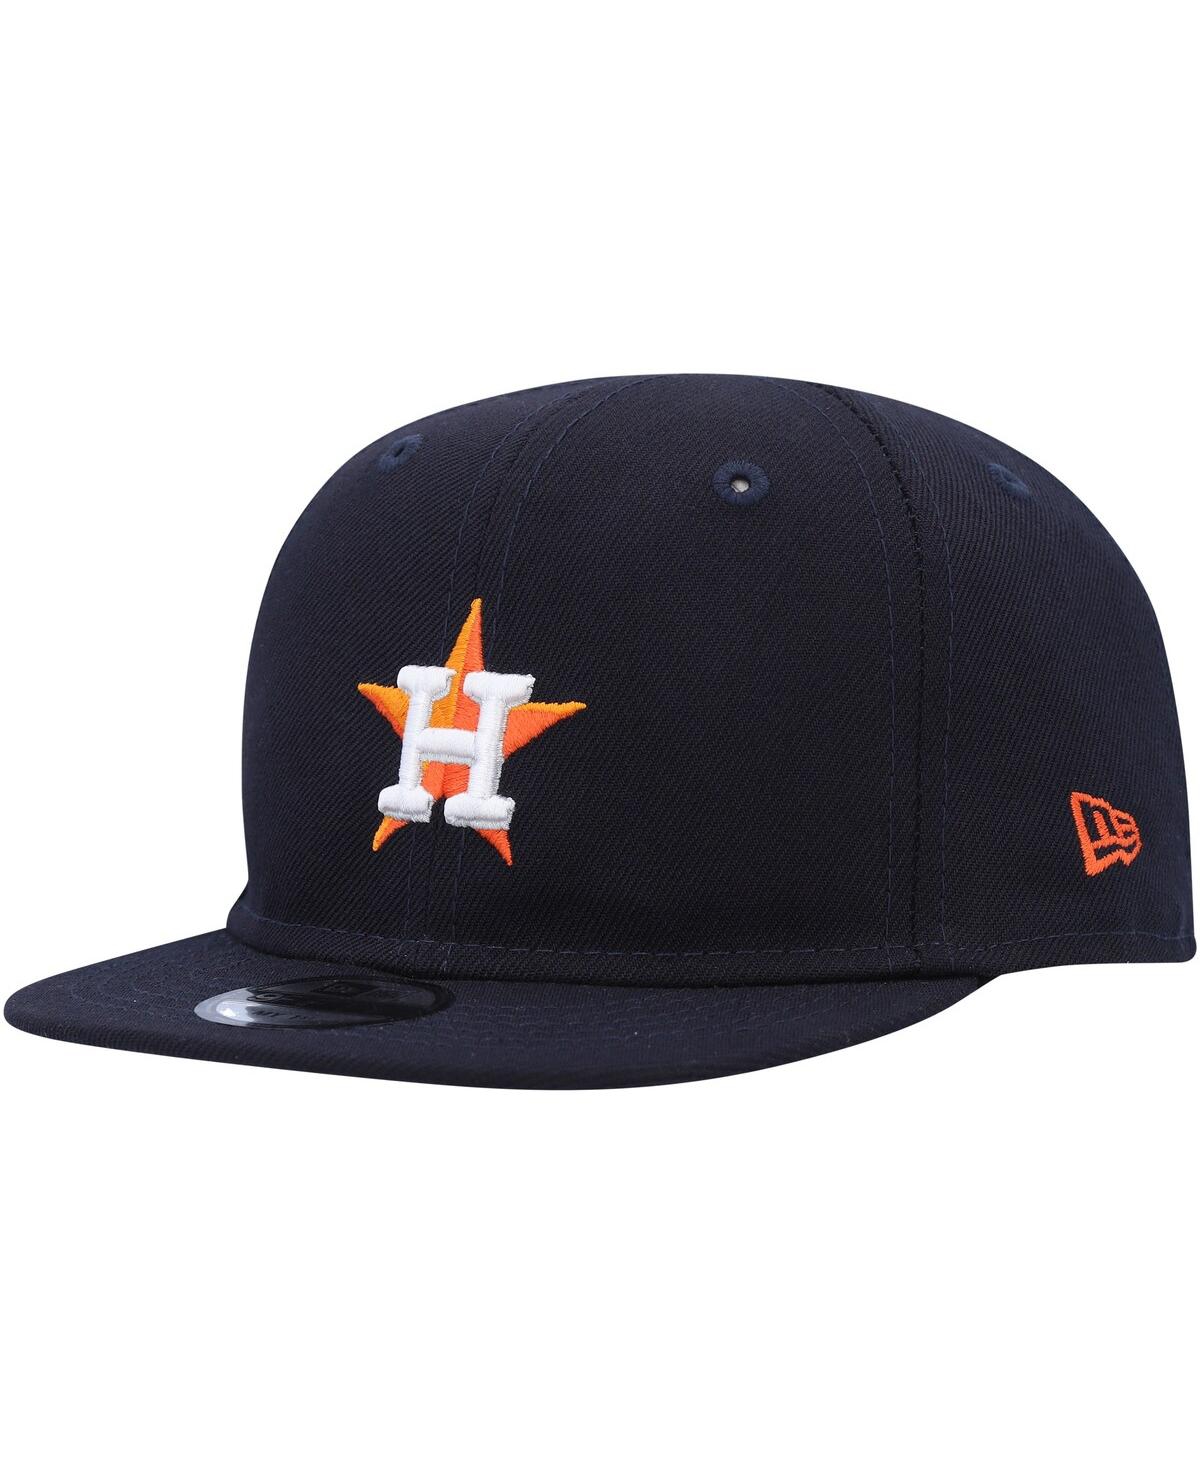 New Era Babies' Infant Boys And Girls  Navy Houston Astros My First 9fifty Adjustable Hat